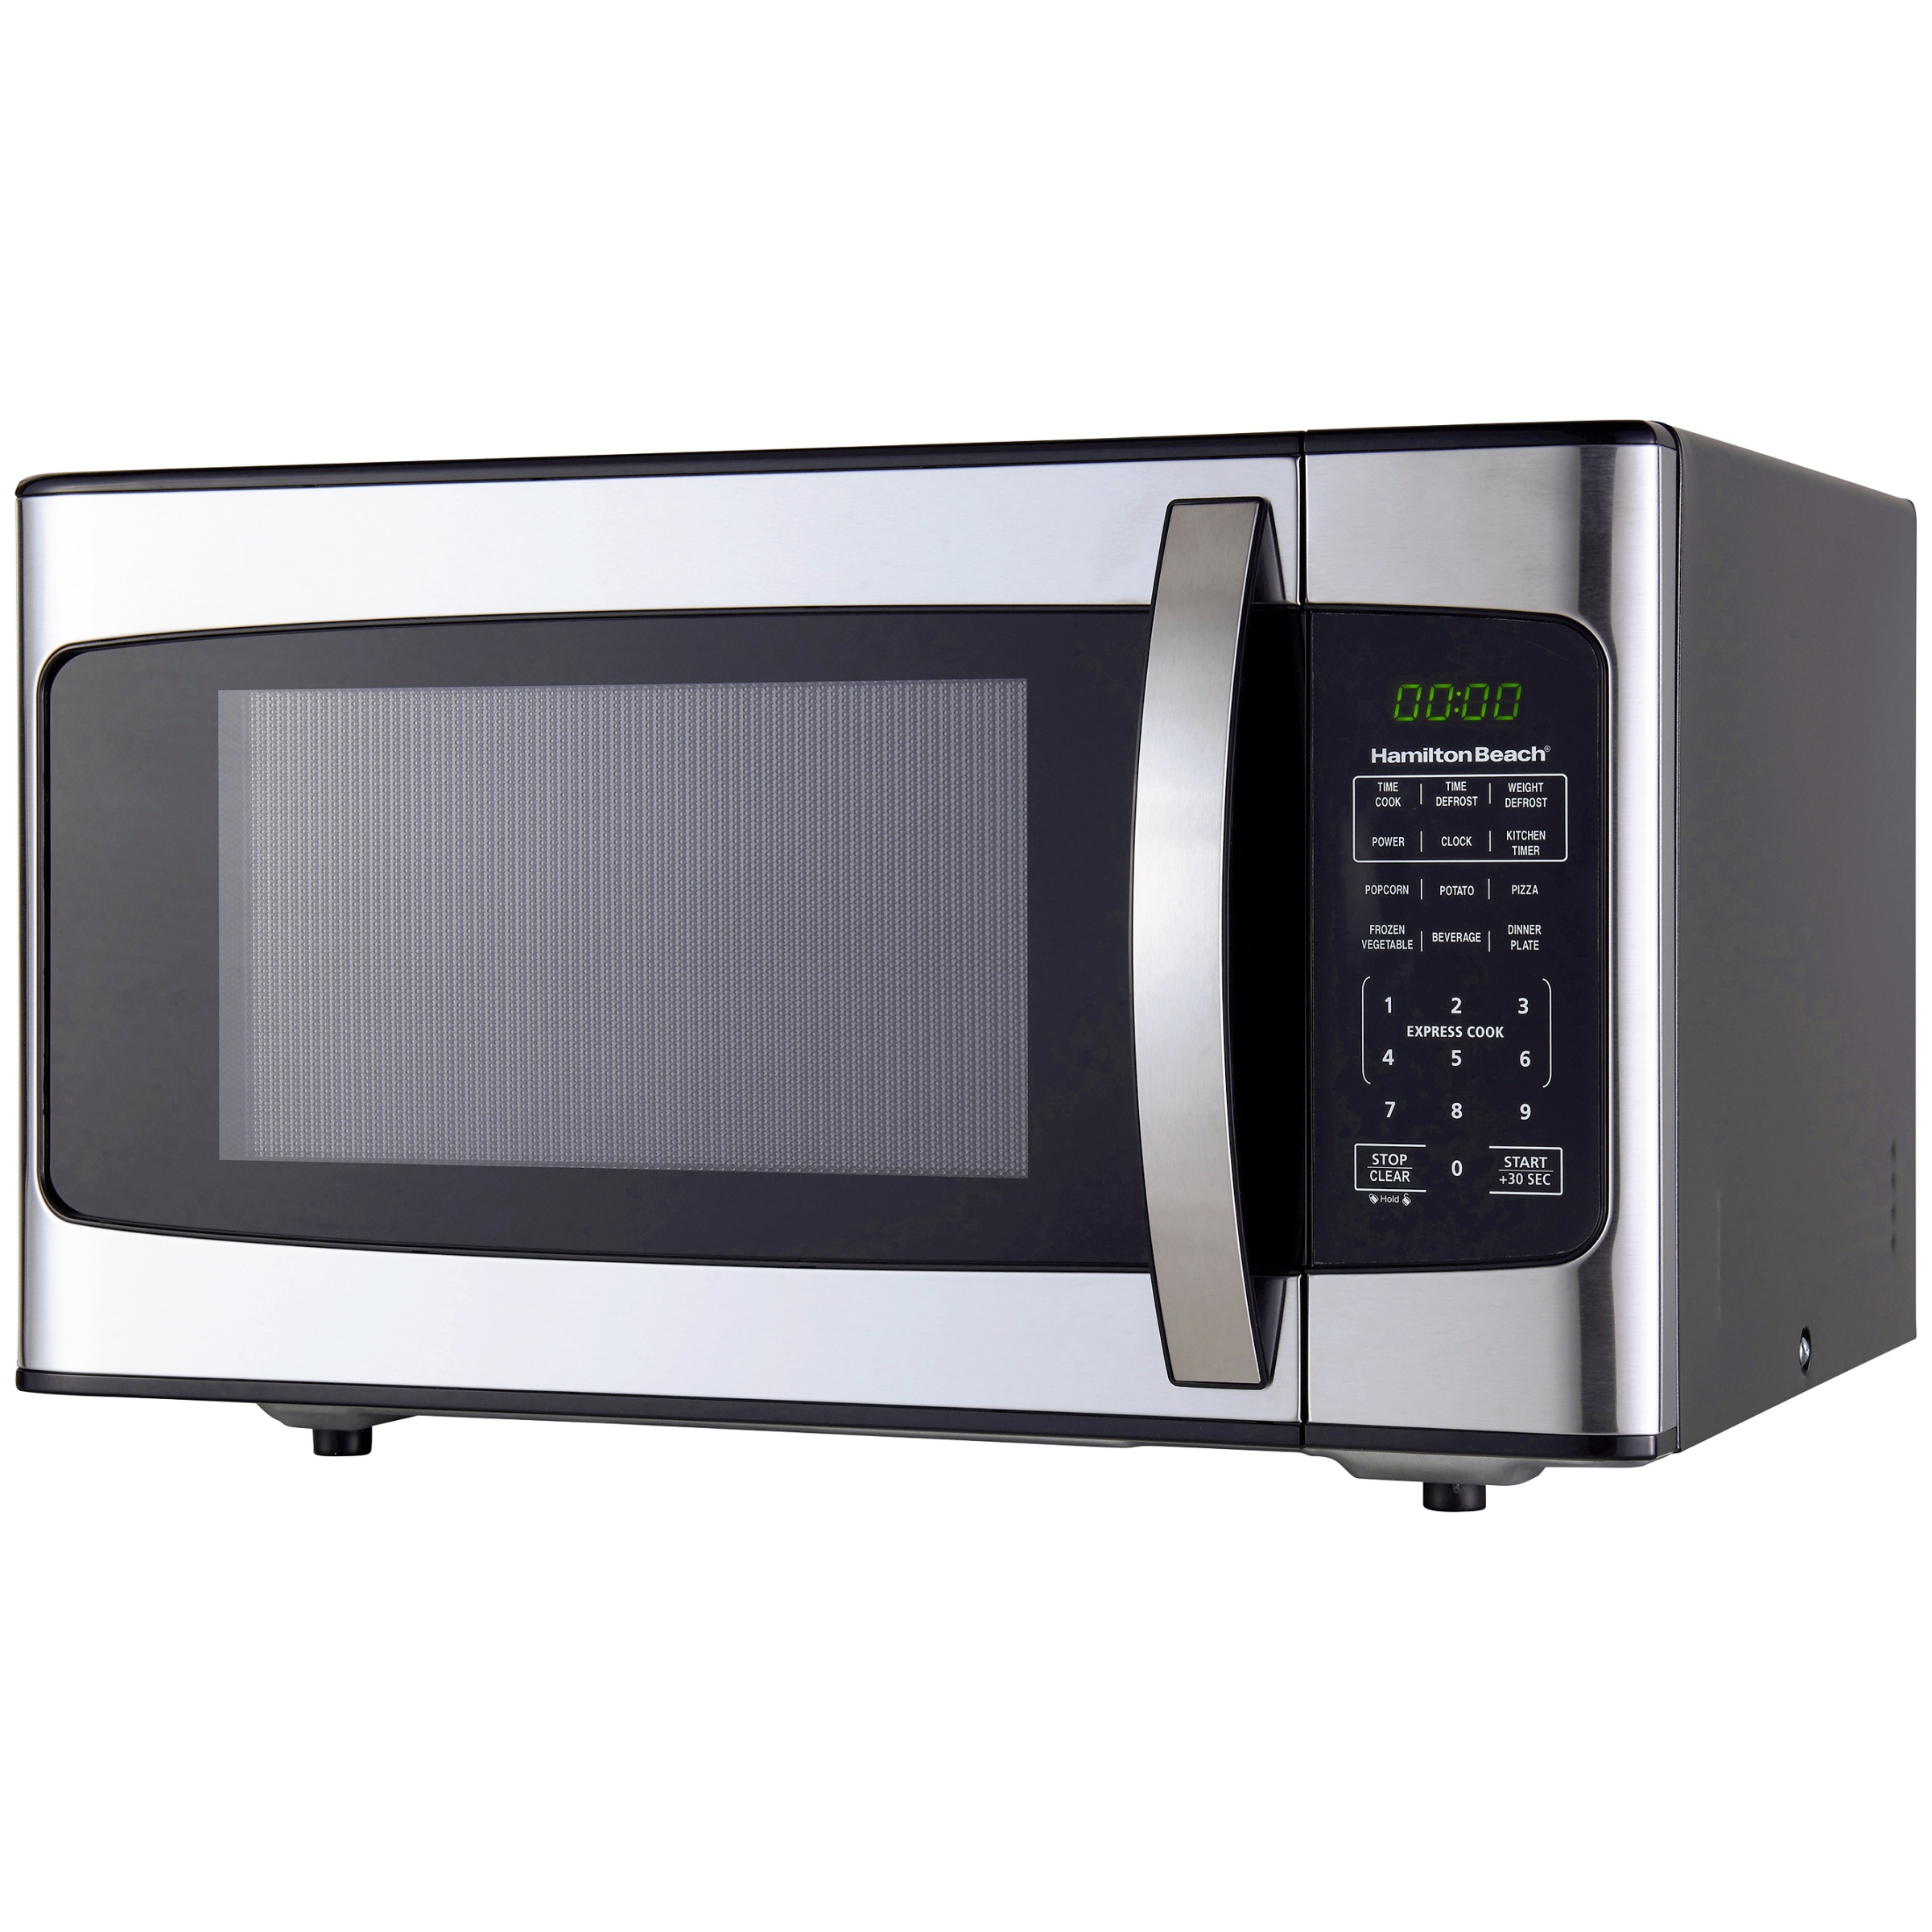 Hamilton Beach 1.1 Cu. Ft. 1000W Stainless Steel Microwave - image 1 of 6